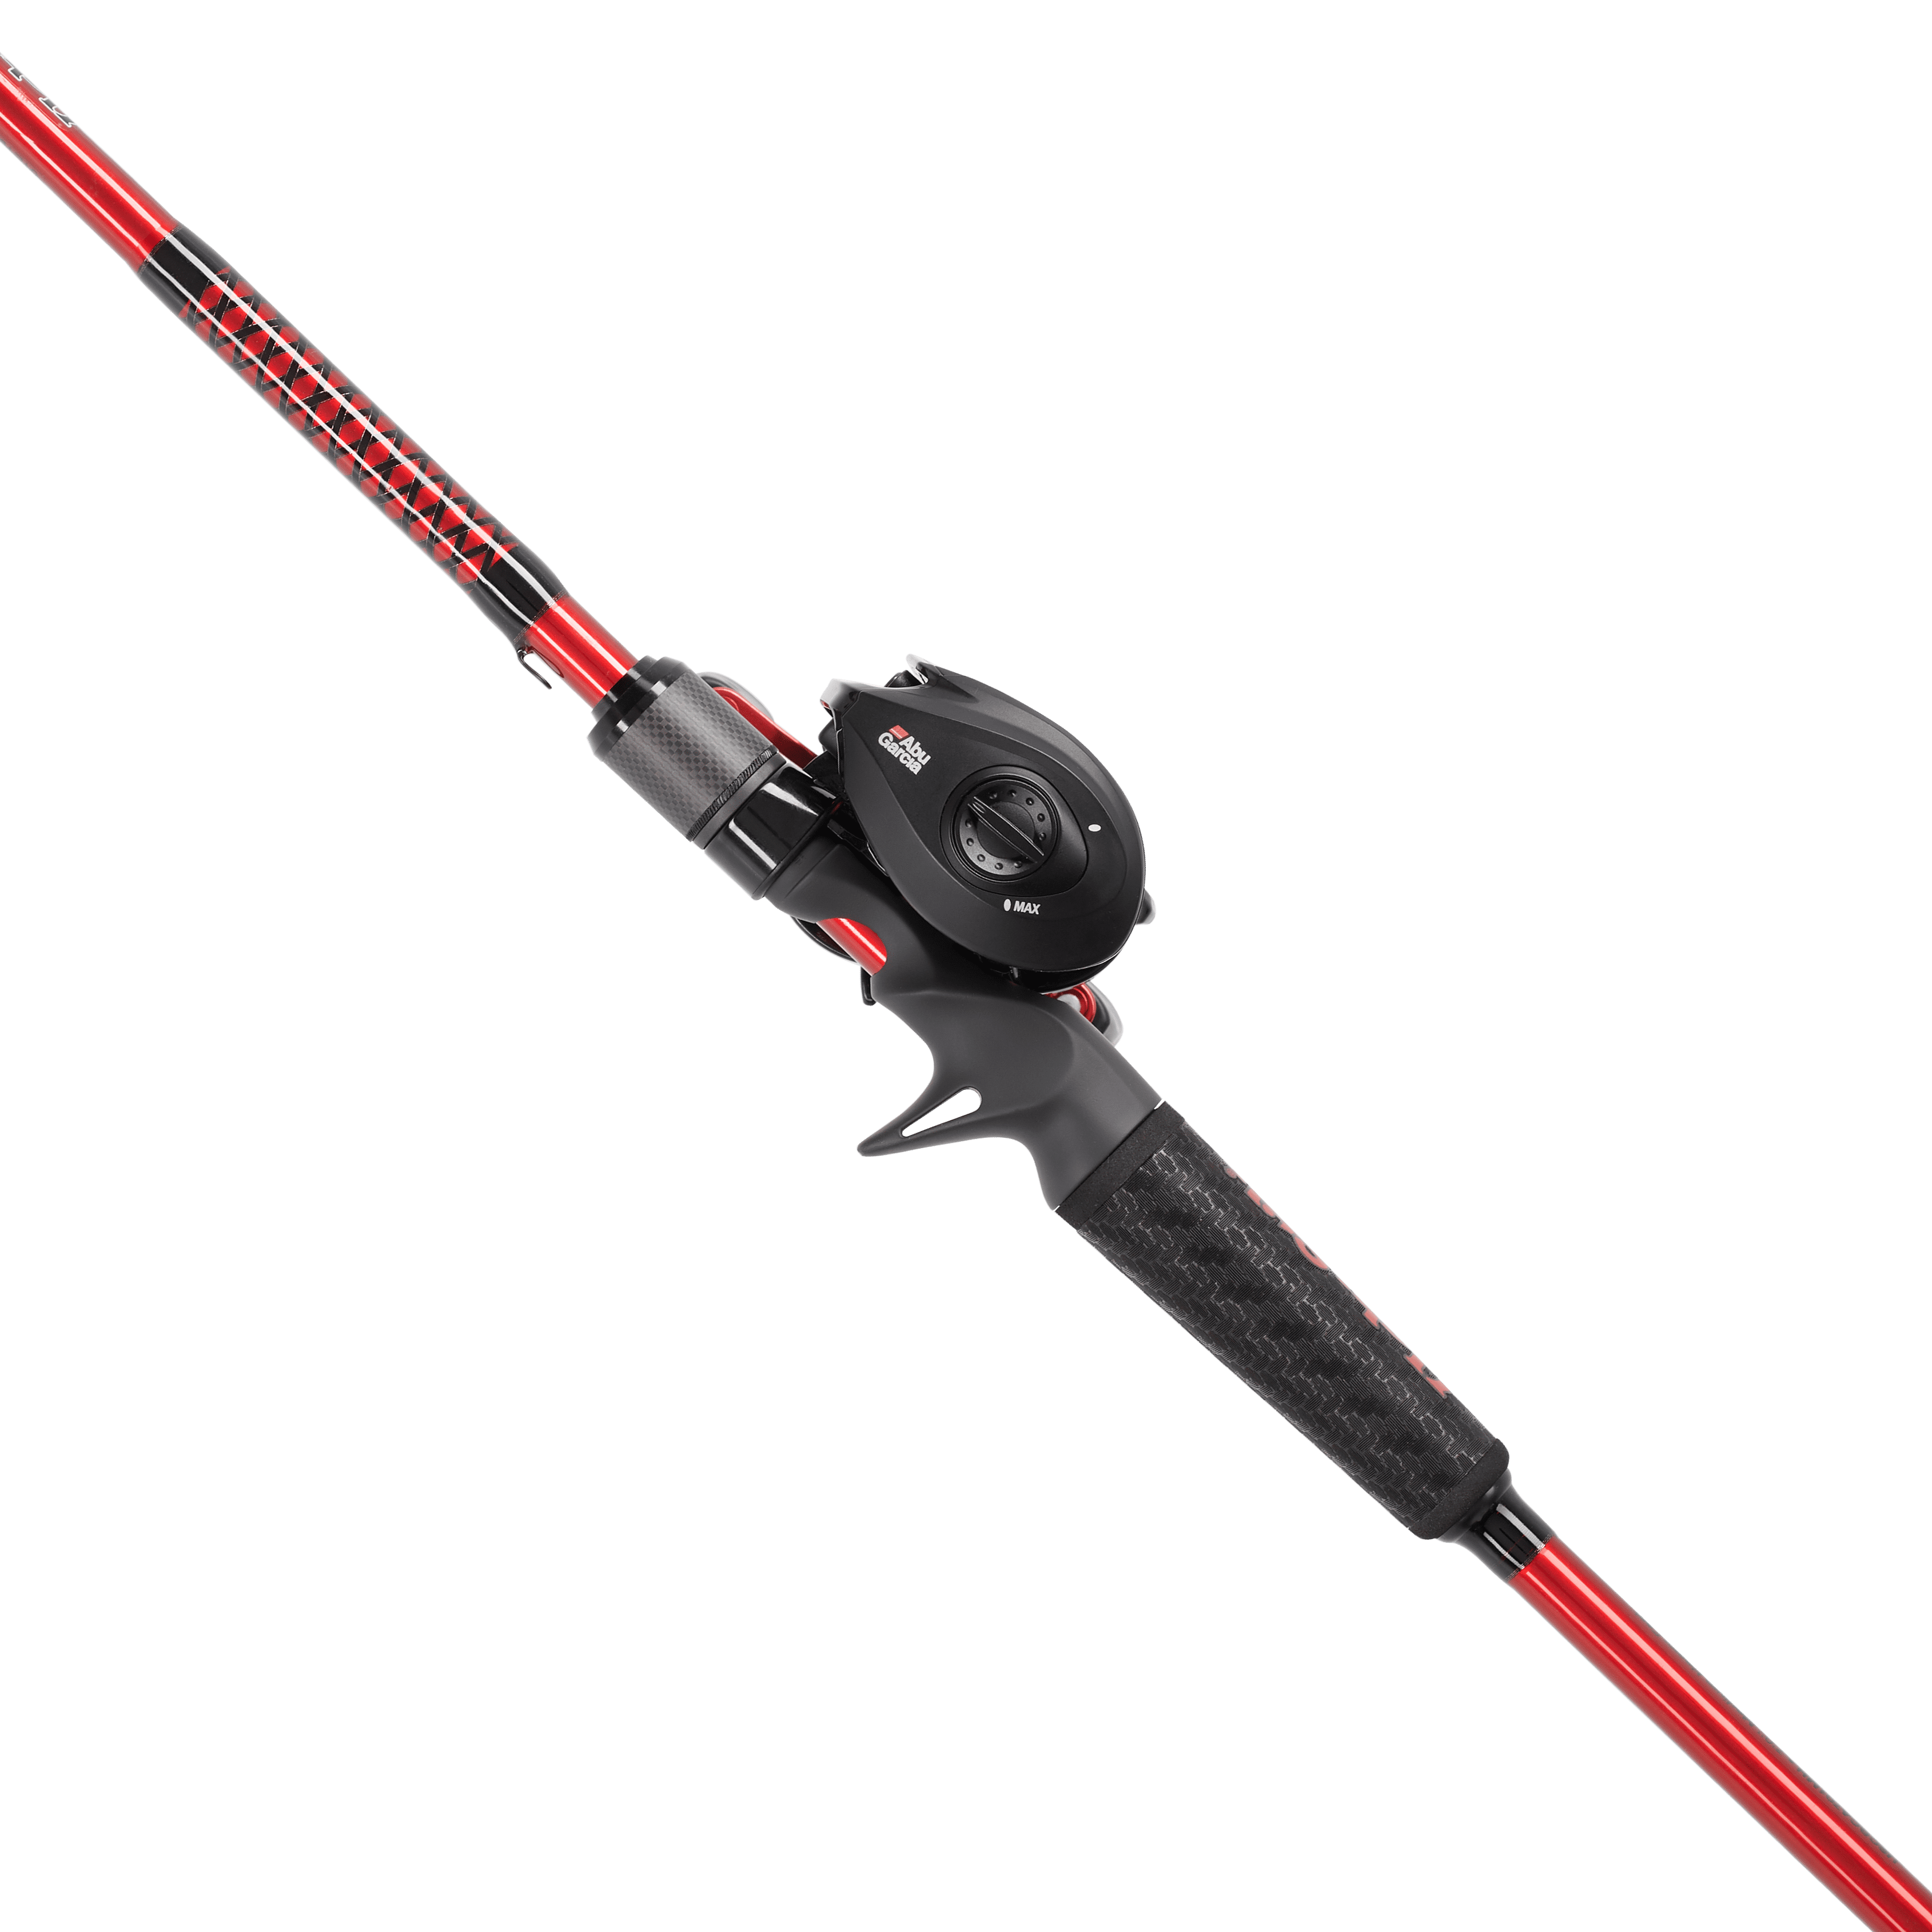 Quality Kids and General Bait Fishing Combo Ugly Stik 702UL And